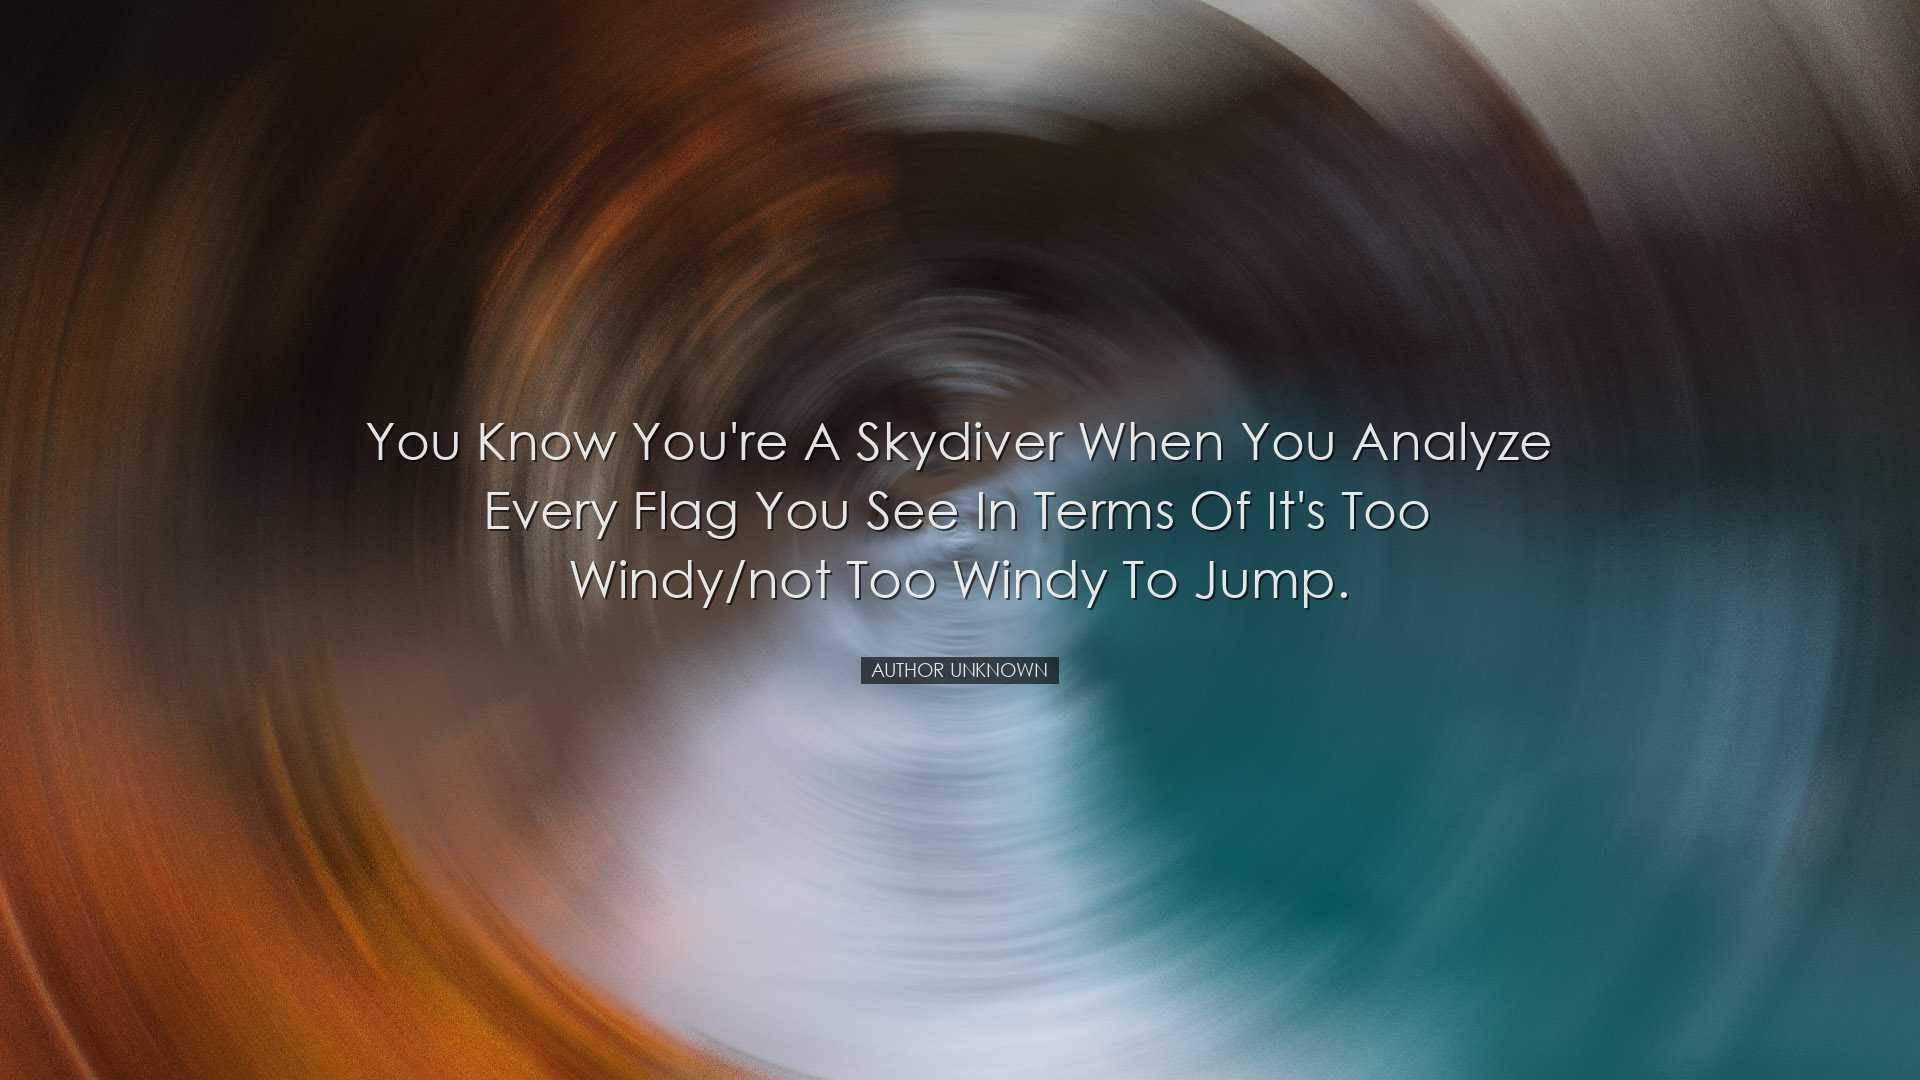 You know you're a skydiver when you analyze every flag you see in